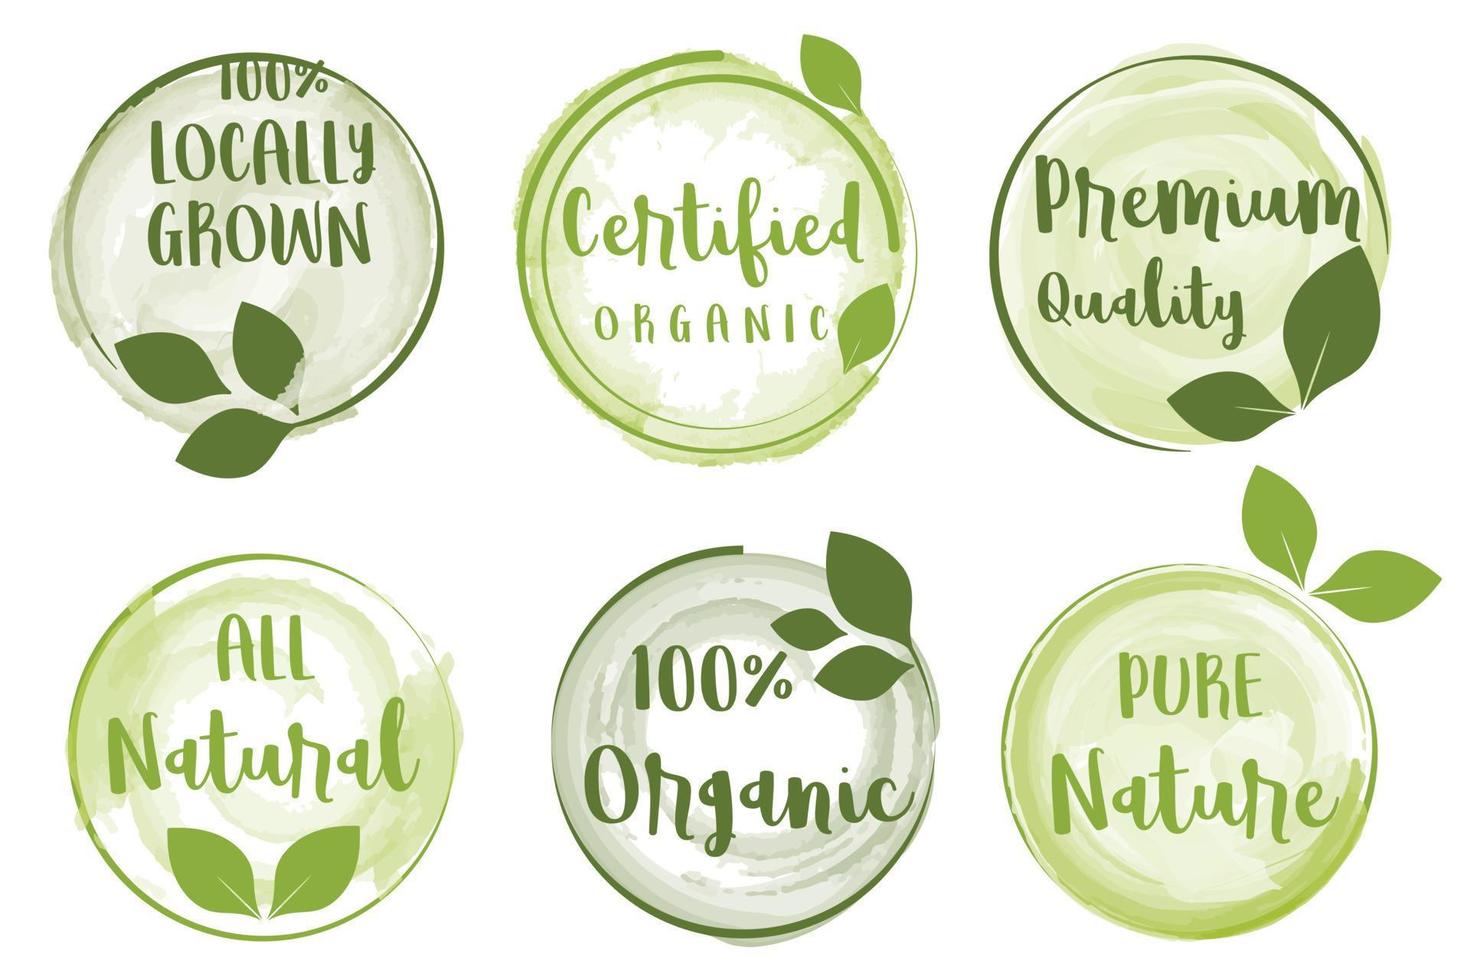 Organic food, natural product and healthy life labels and badges collection for food market, organic products, natural product promotion and premium quality for food and drink. vector